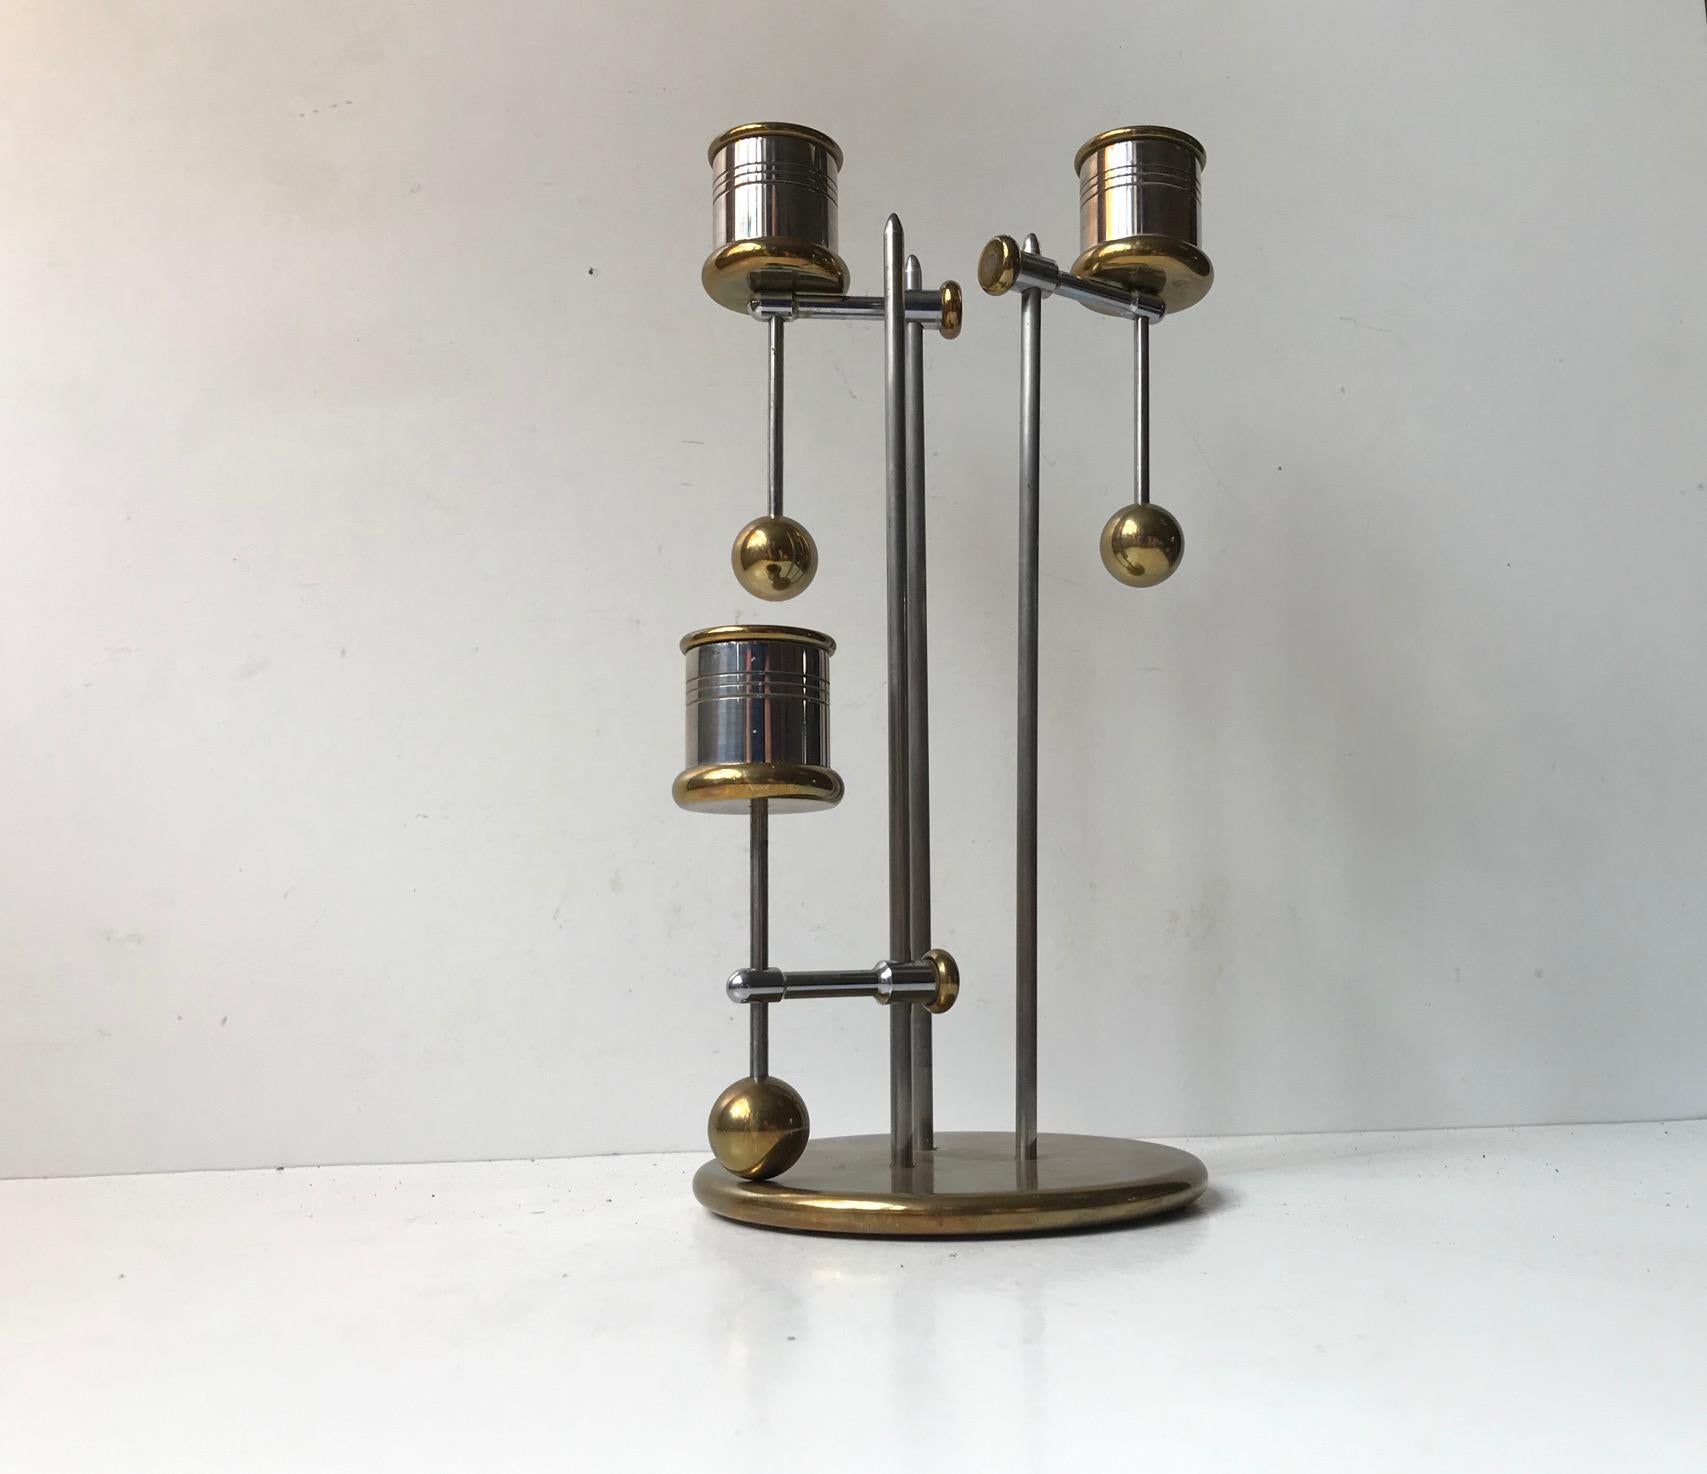 Adjustable and counterweighted candlestick in brass and stainless steel by Peter Seidelin Jessen for Delite. Suspension and counterweight mechanisms allows you to adjust the heights of the 3 arms and make sure that the candles do tilt over when you